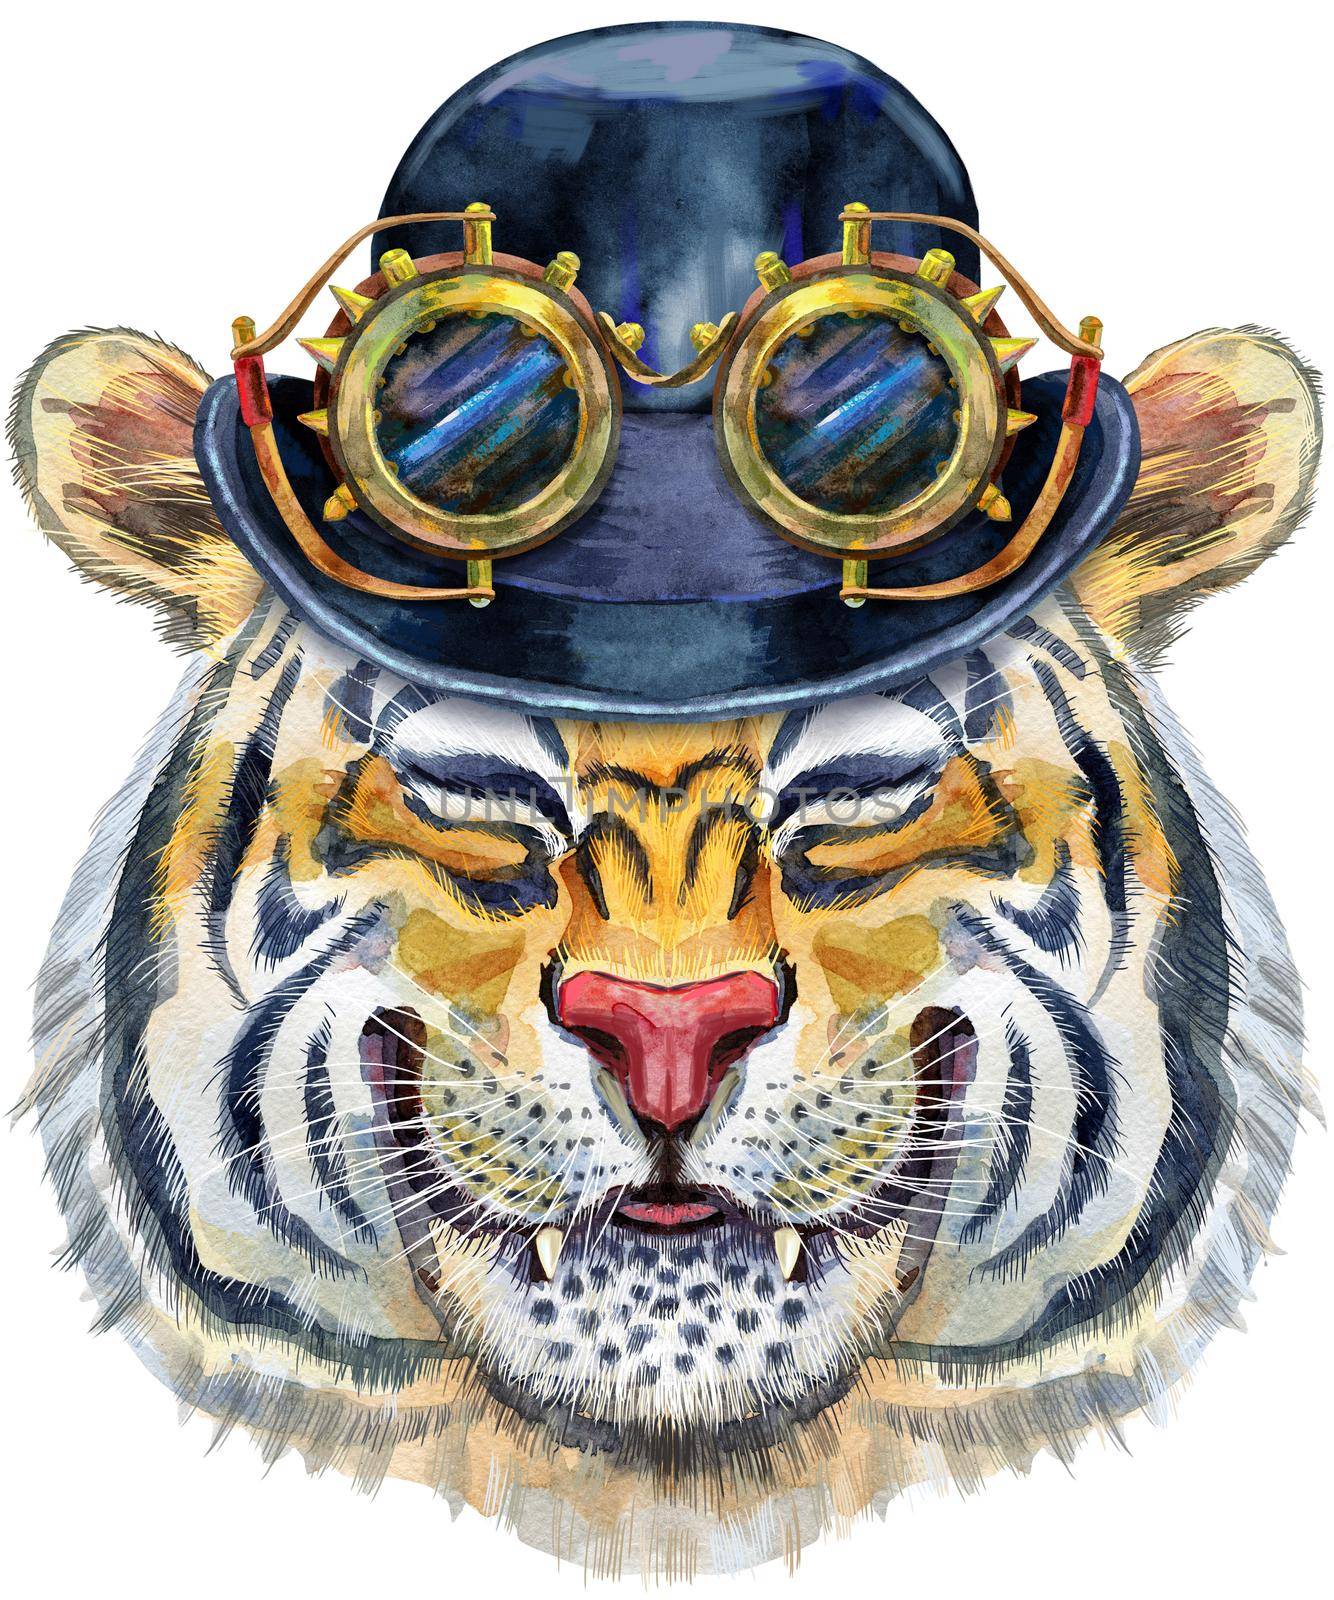 Watercolor illustration of orange tiger with hat bowler and steampunk glasses. Wild animal watercolor illustration on white background